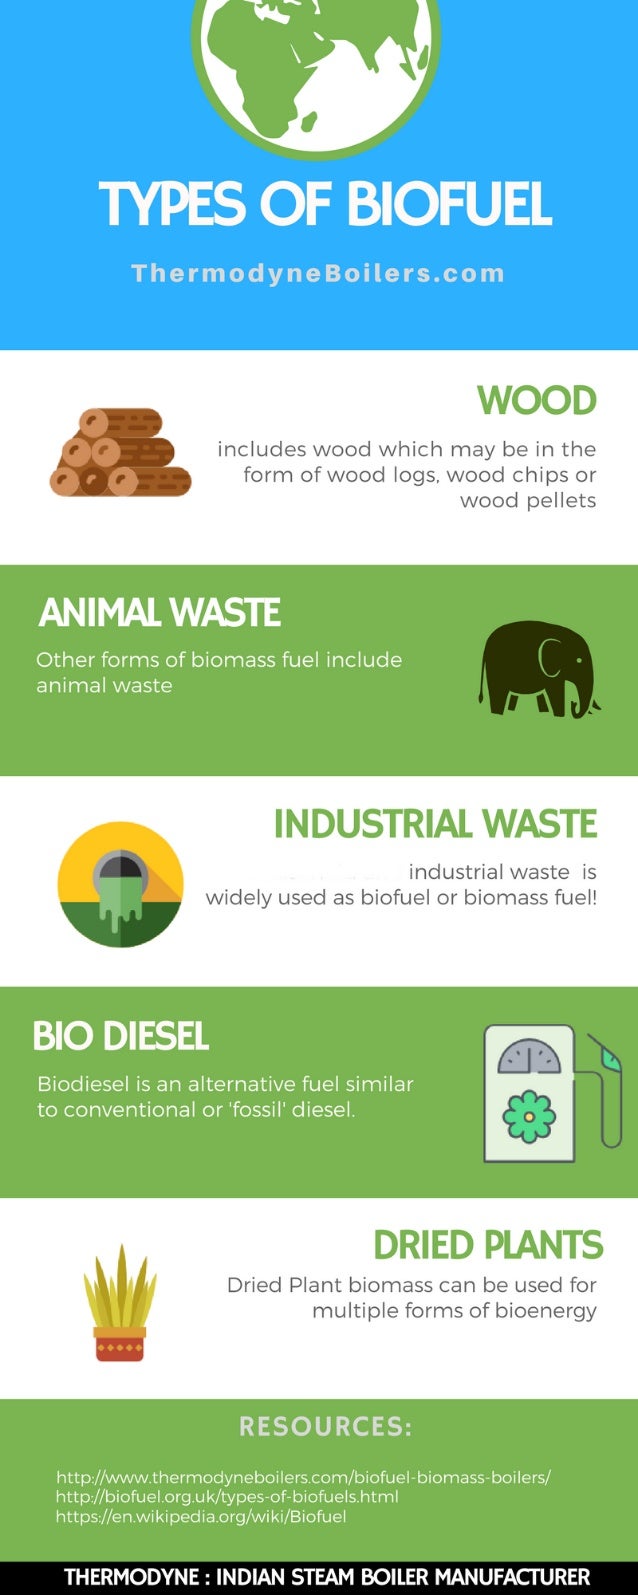 Biofuels An Common Type Of Biofuel